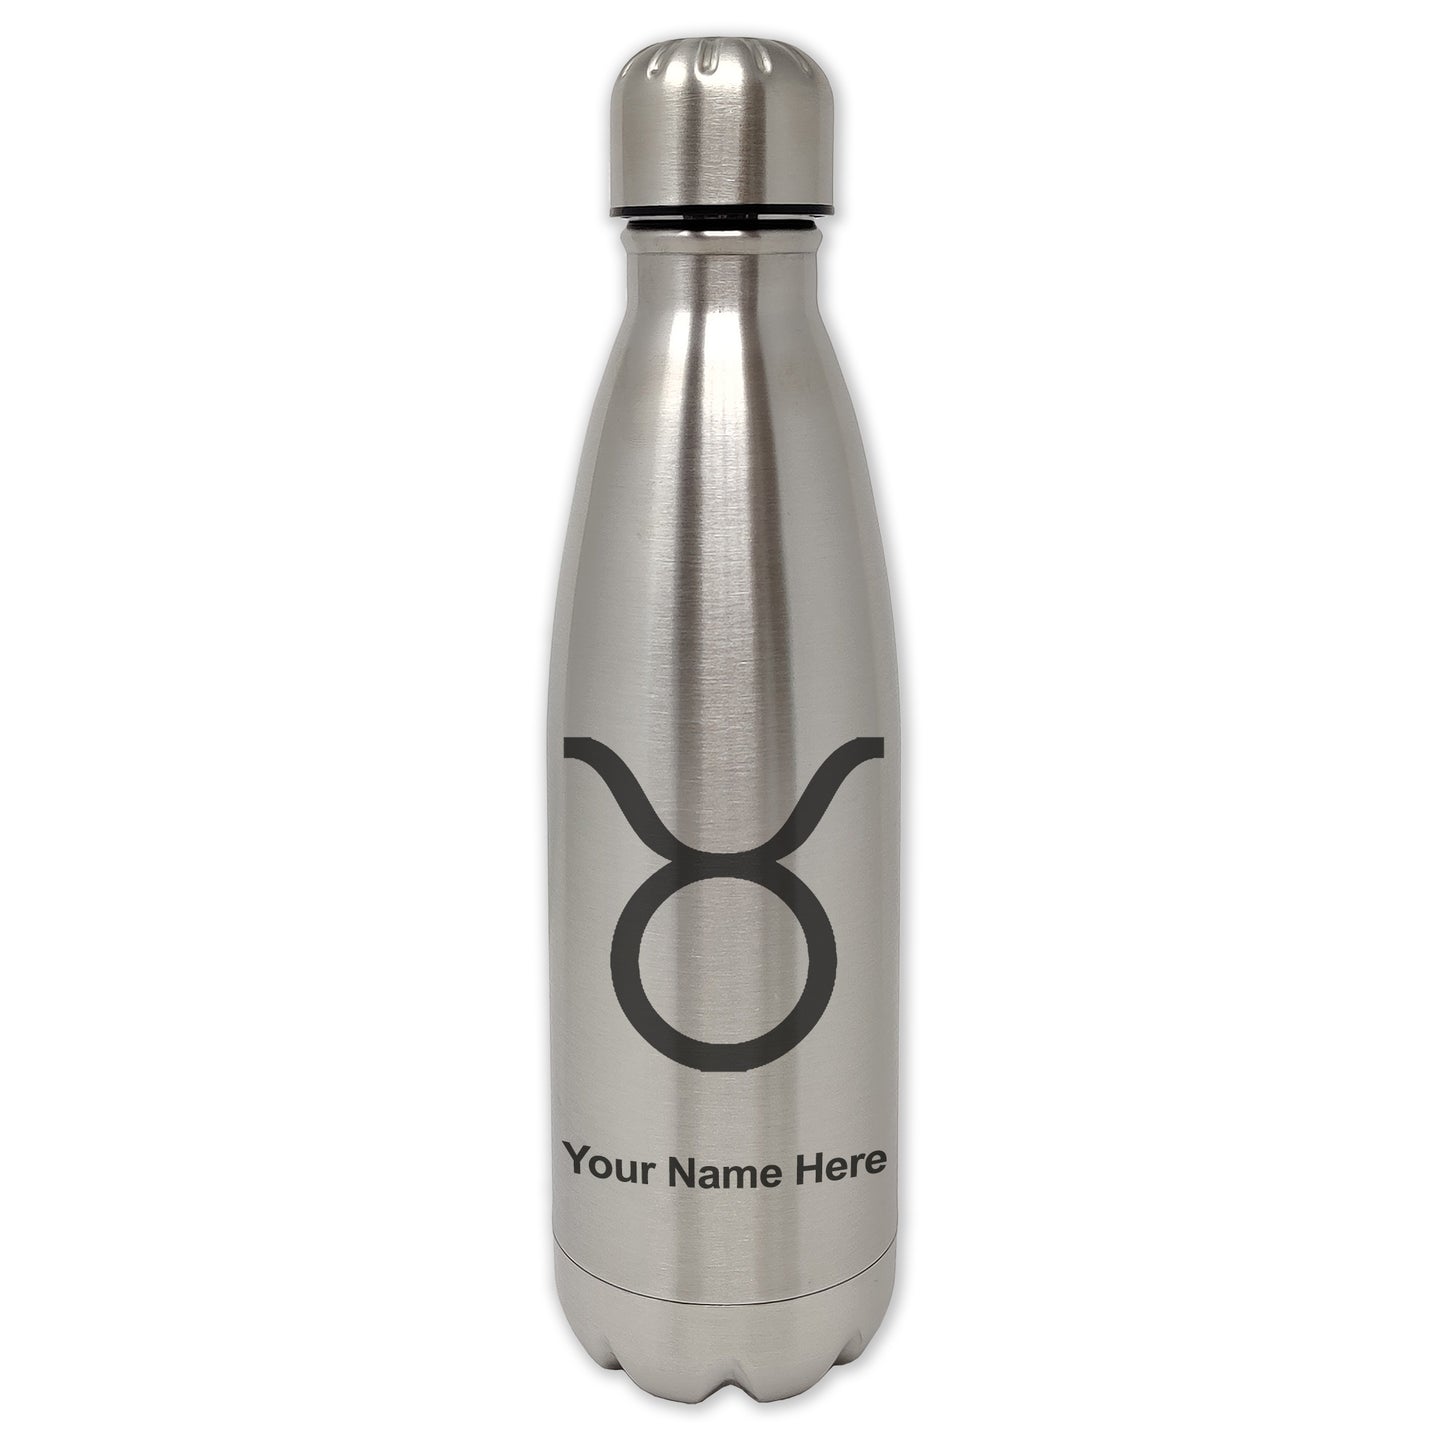 LaserGram Single Wall Water Bottle, Zodiac Sign Taurus, Personalized Engraving Included